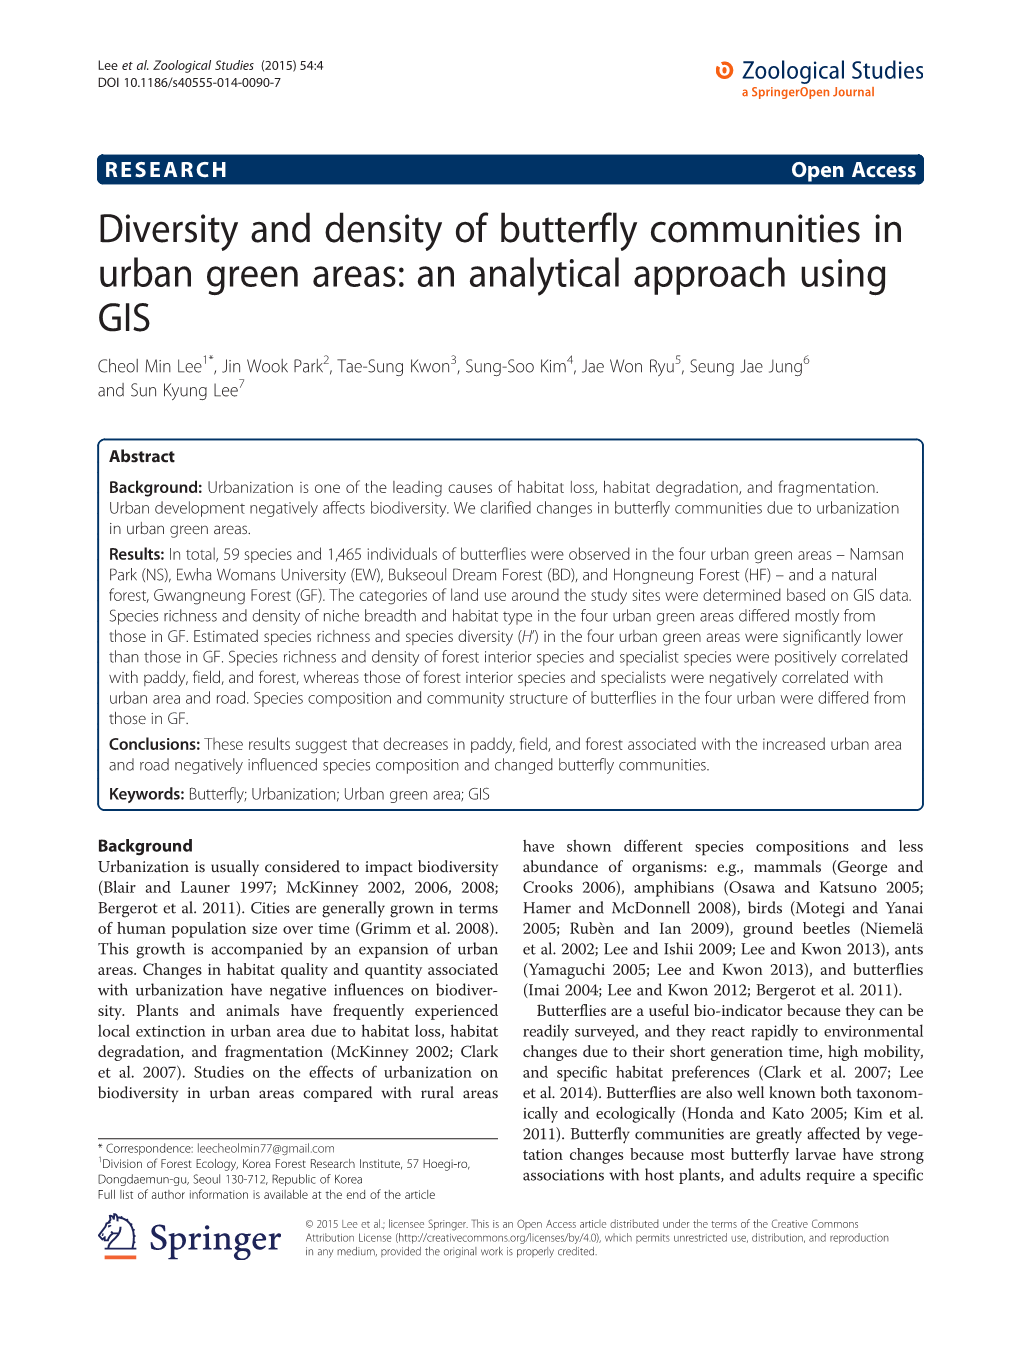 Diversity and Density of Butterfly Communities in Urban Green Areas